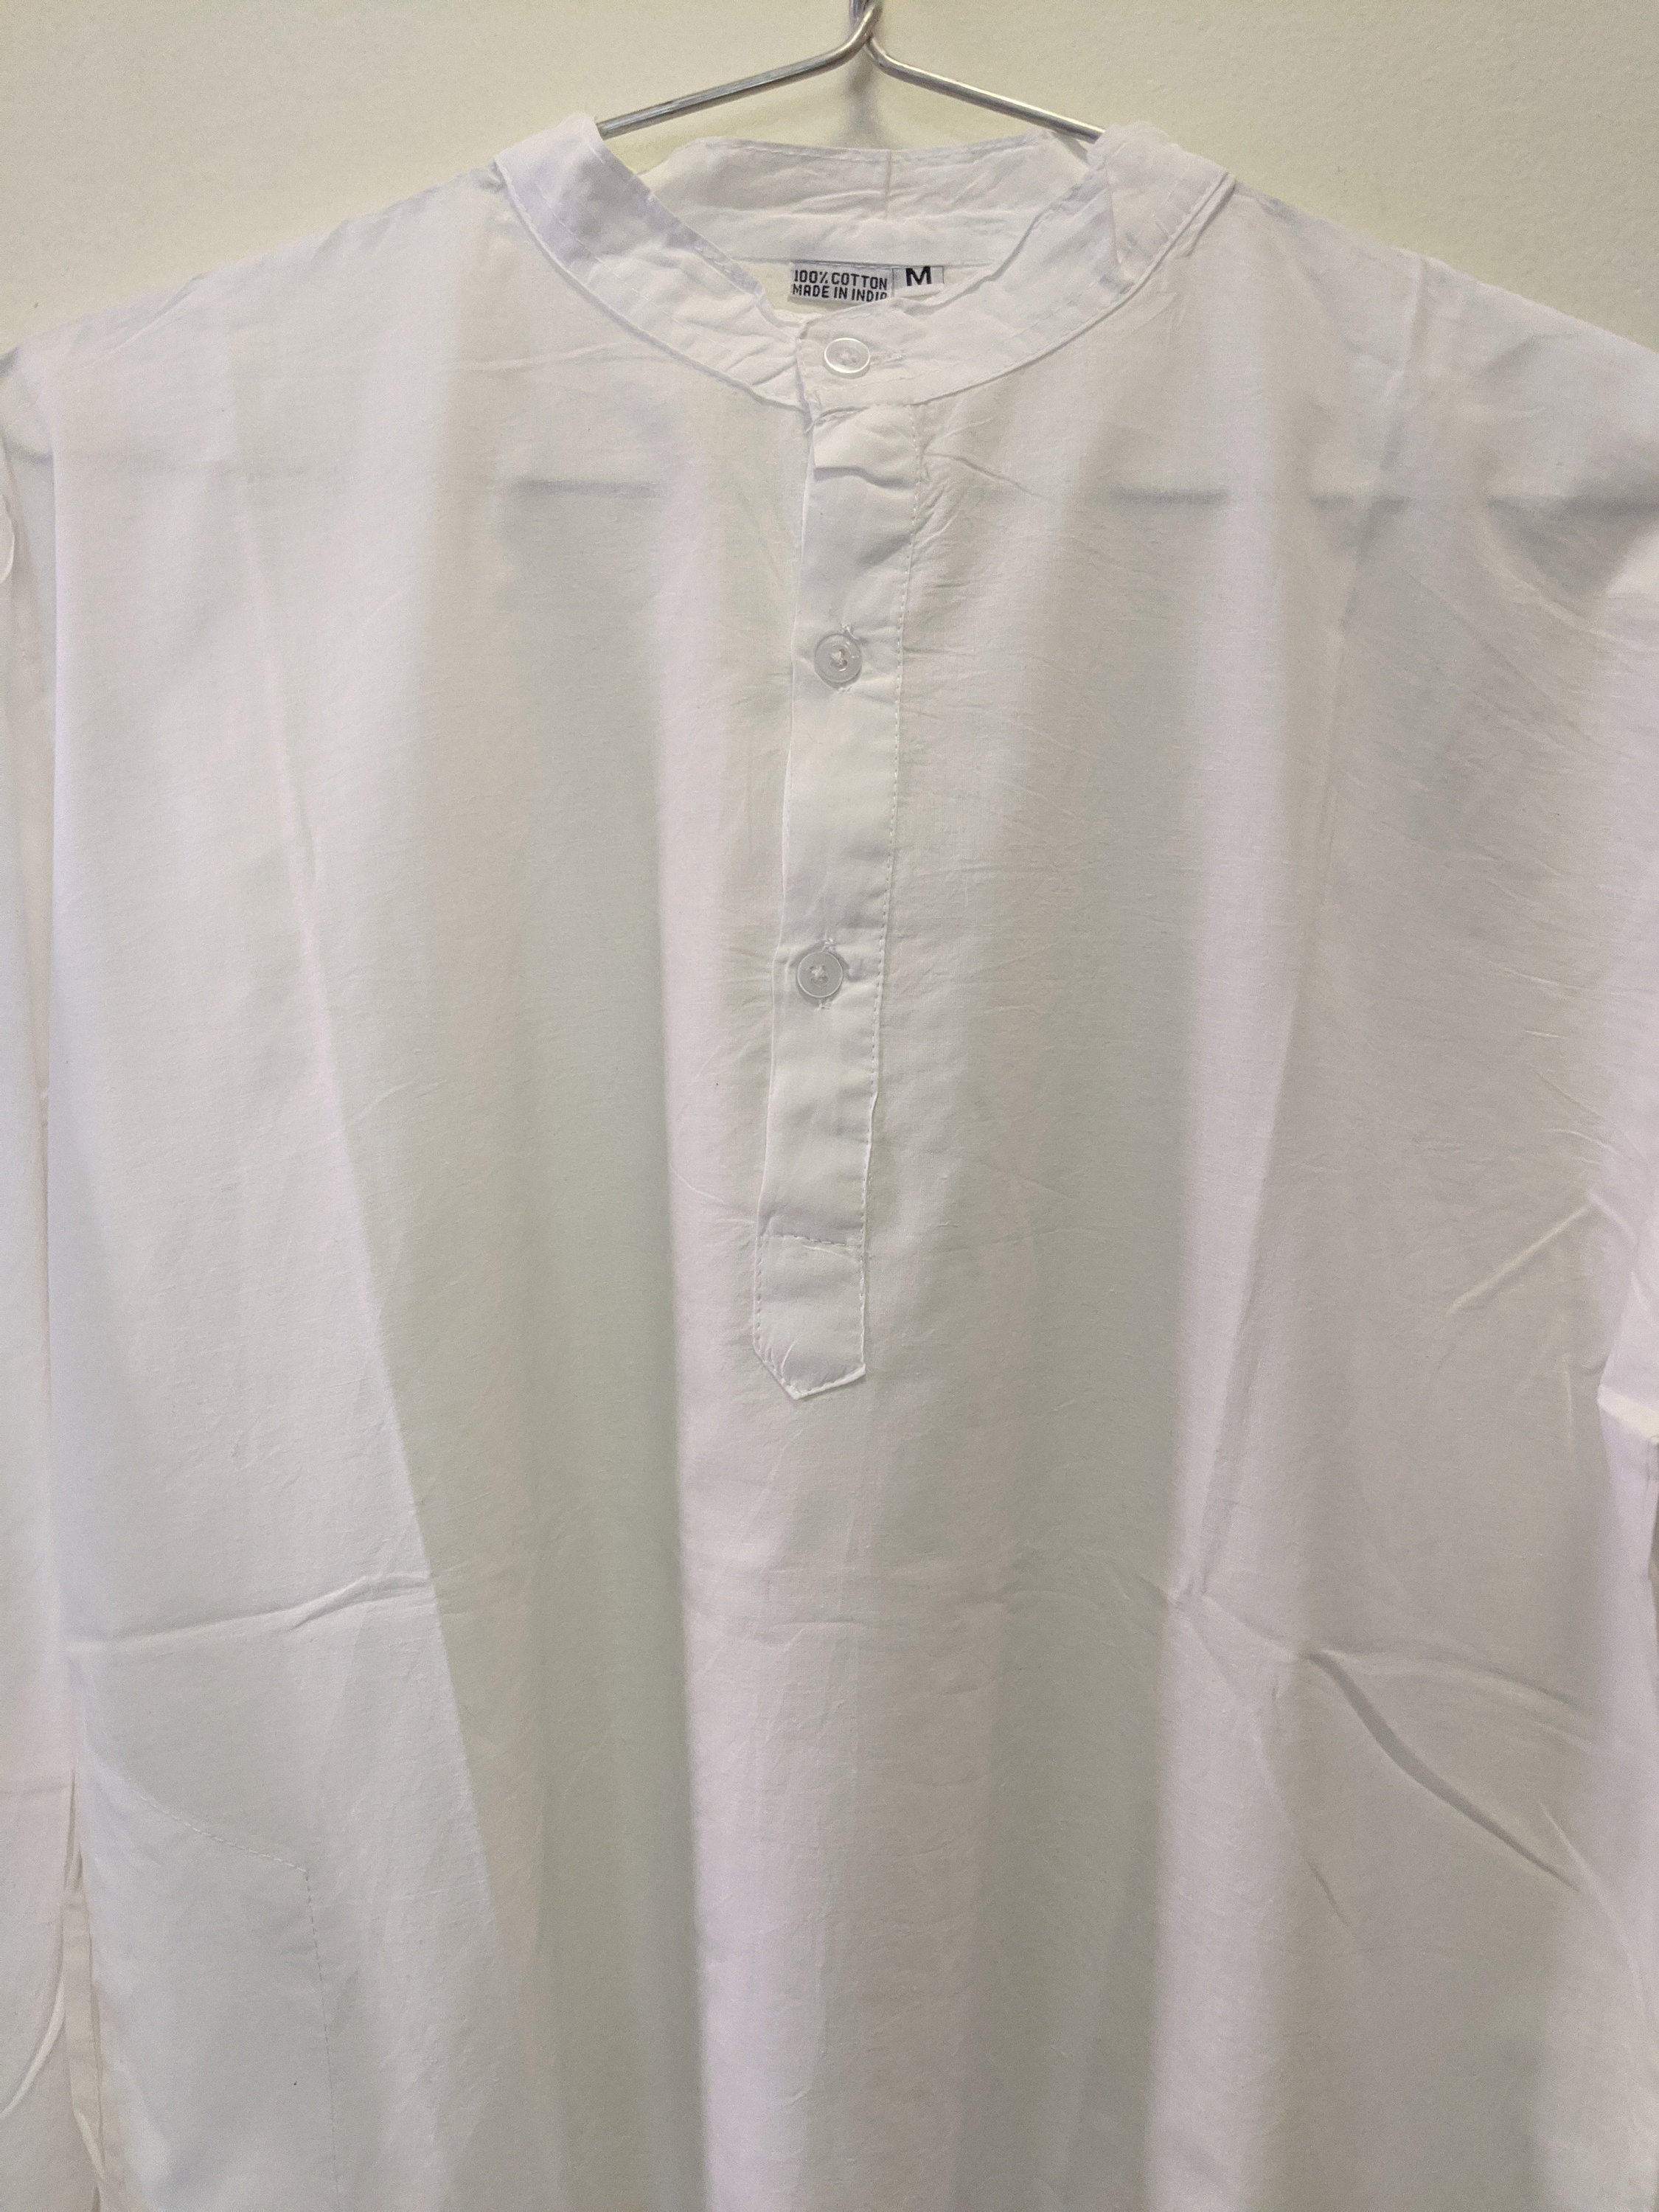 White Cotton Classic Shirt, Tunic, Kurta, Blouse, Band collar for woman or man, Unisex with inner side pocket